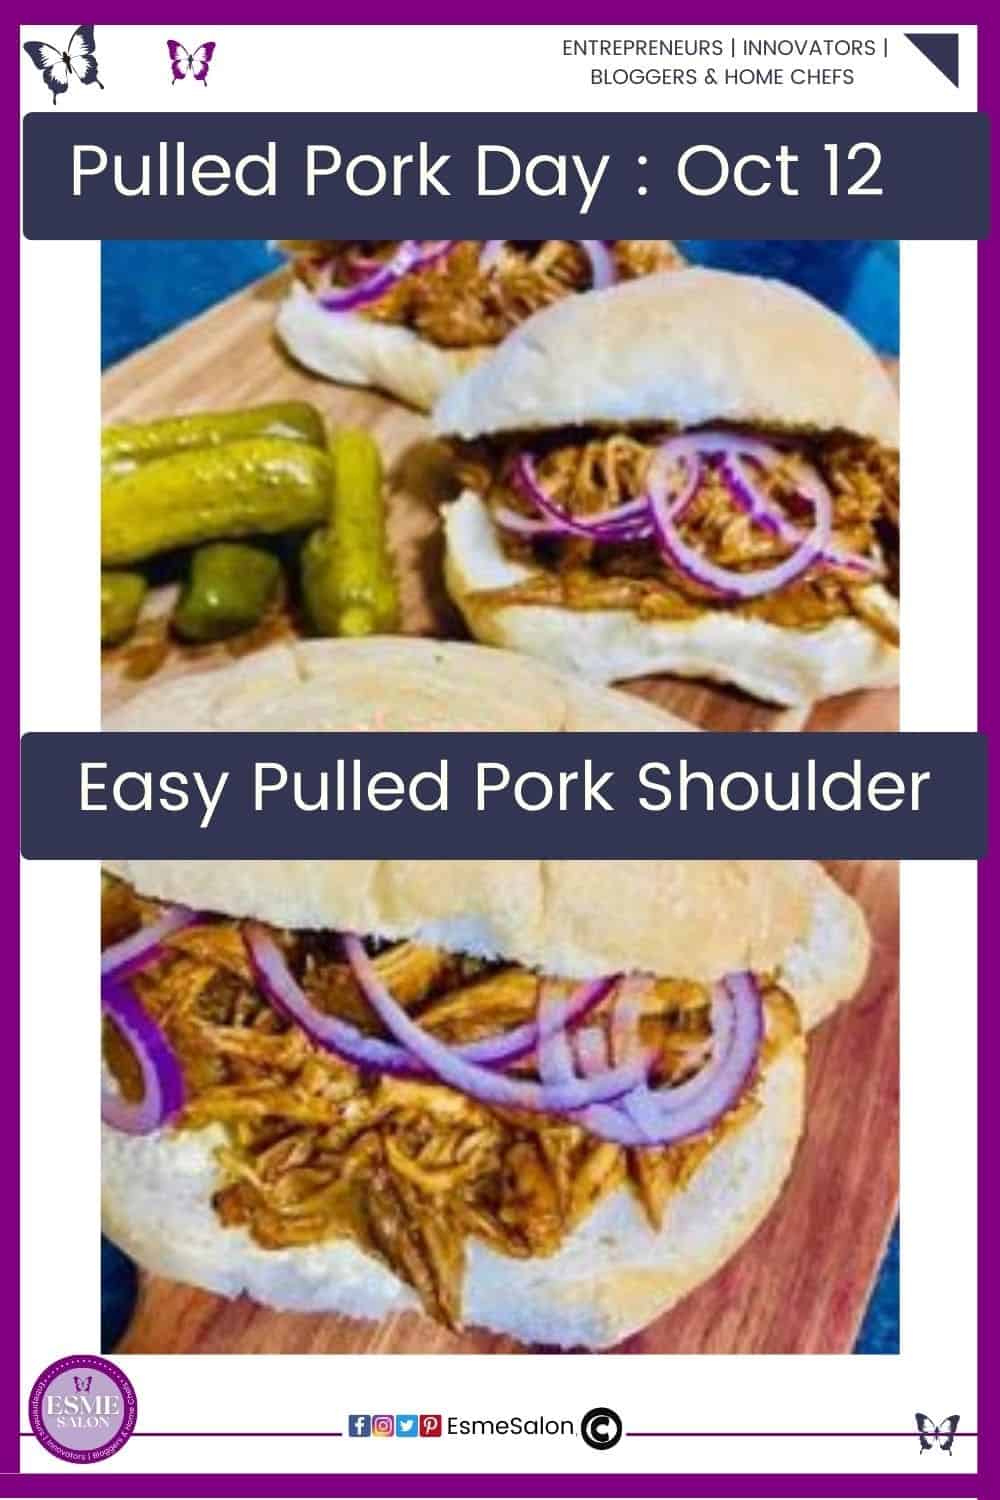 an image of Pulled Pork Shoulder stuffed in a bun with purple onion rings and gherkins on the side.